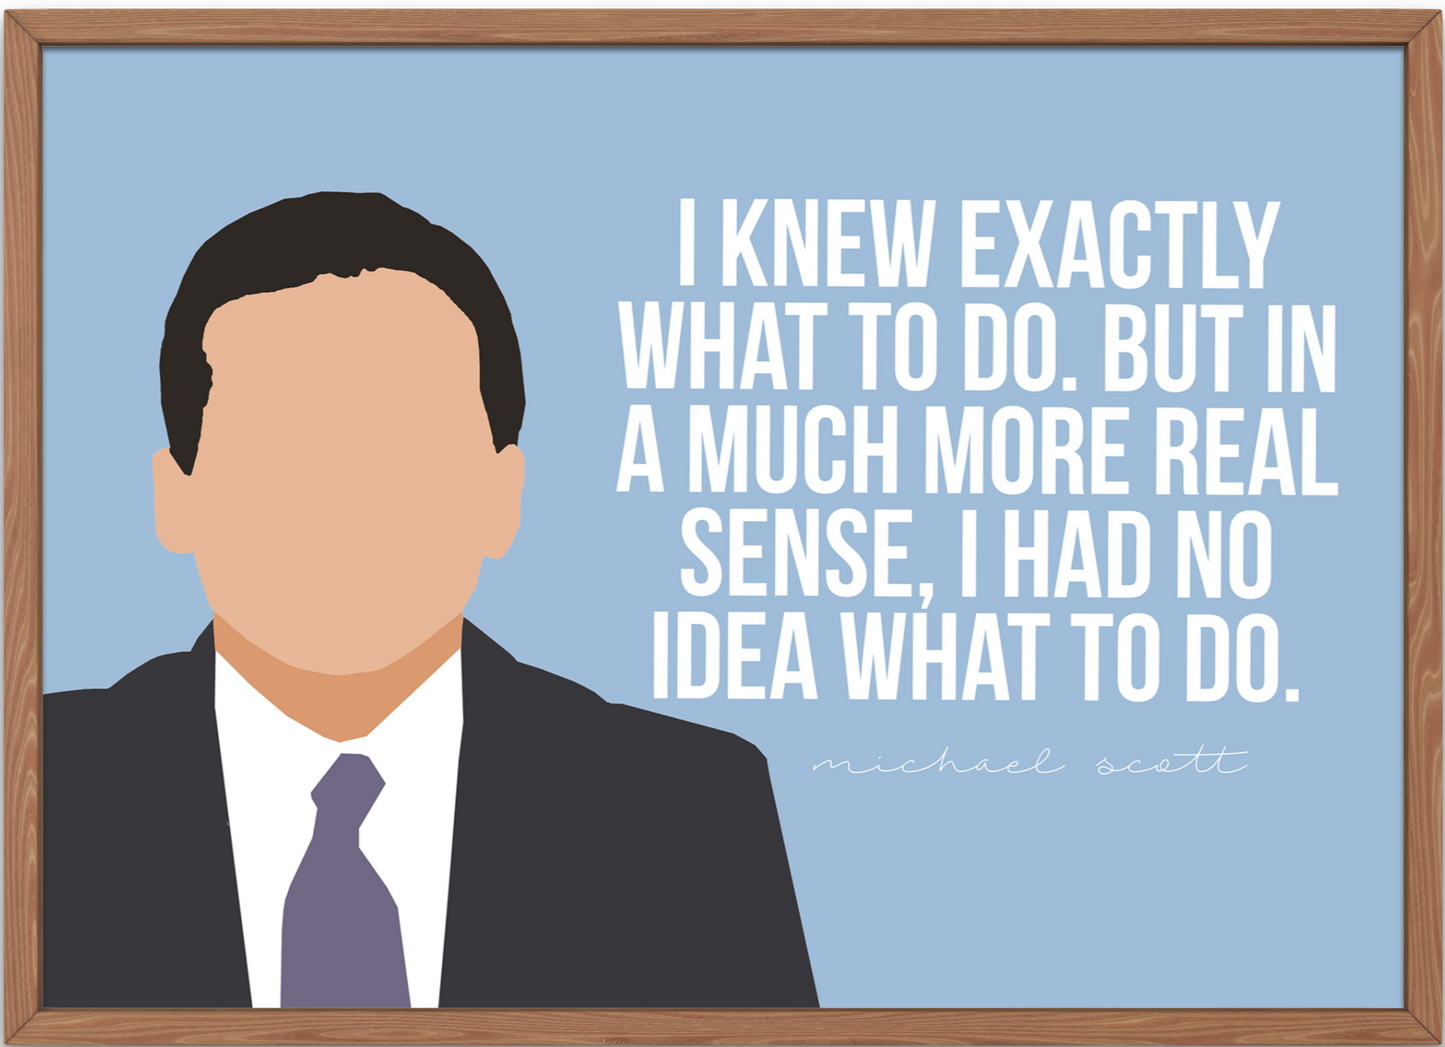 The Office Poster | Michael Scott - "I knew exactly what to do" Quote